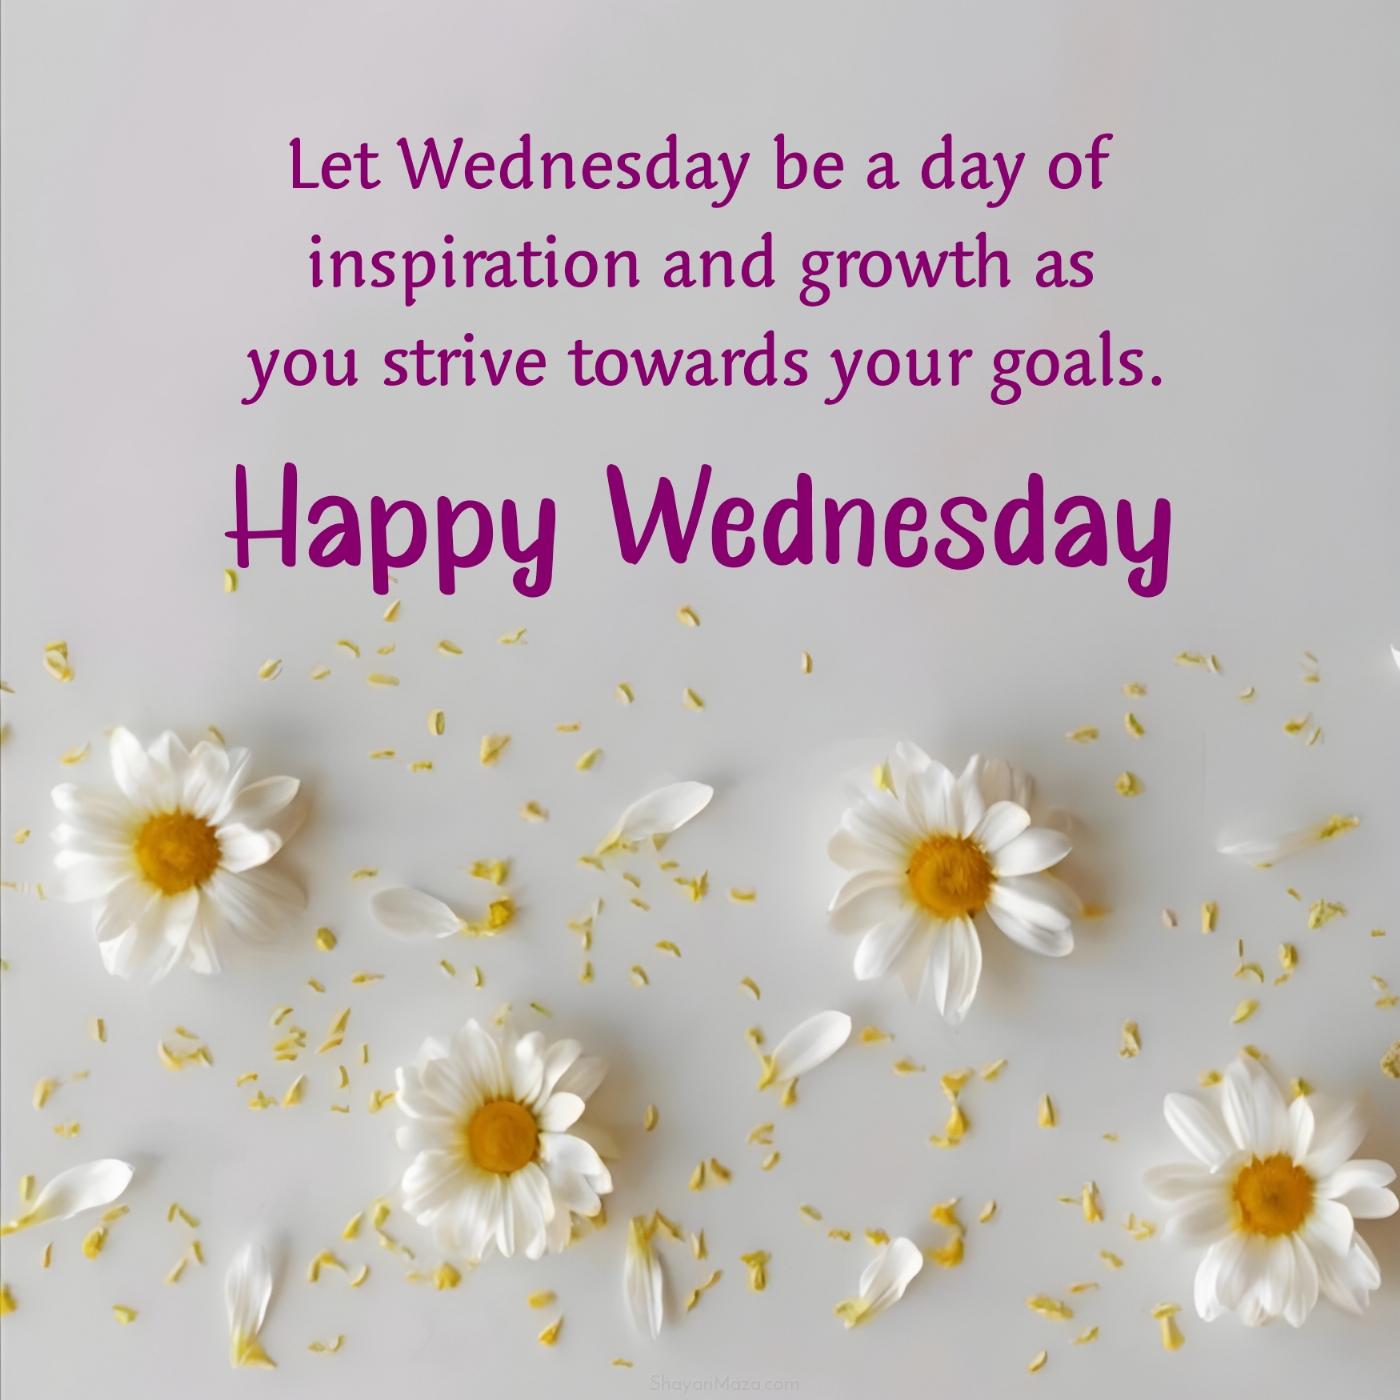 Let Wednesday be a day of inspiration and growth as you strive towards your goals